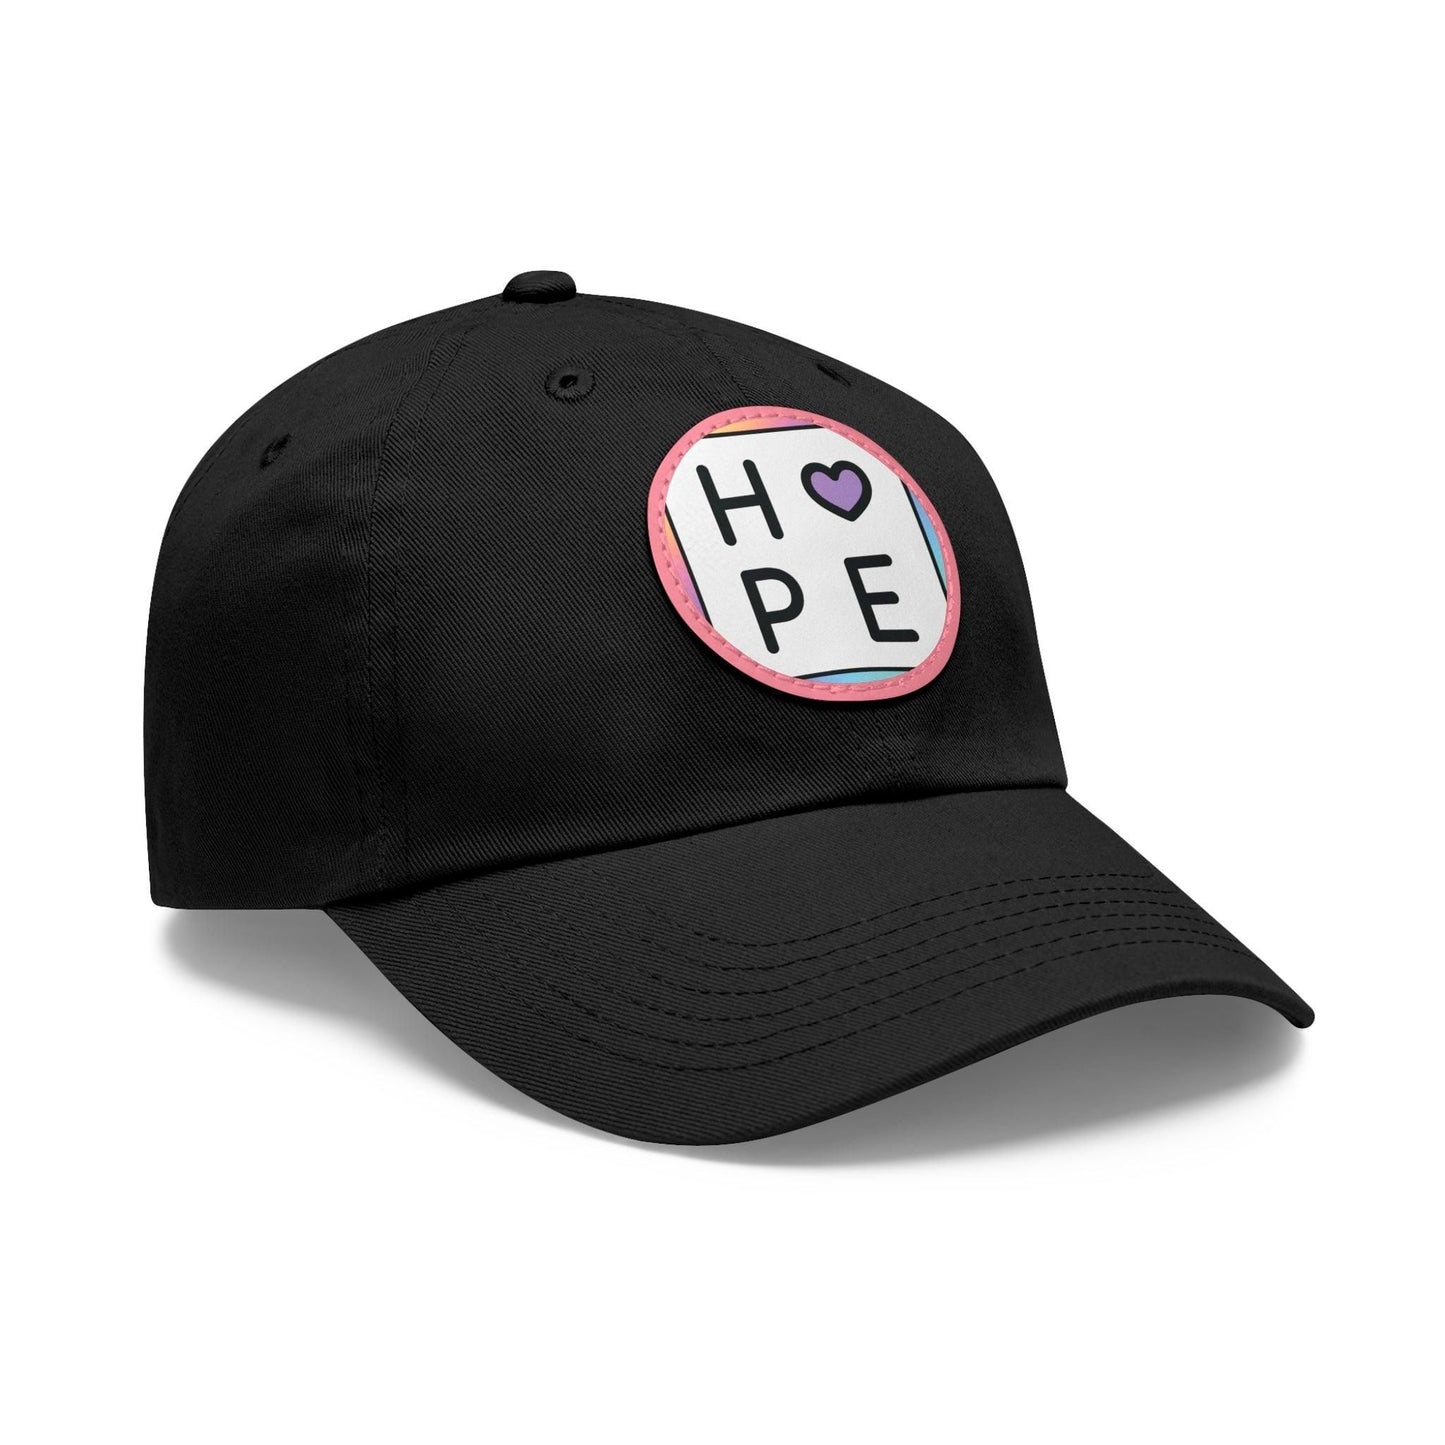 Hope Baseball Cap with Leather Patch Cap Black / Pink patch Circle One size